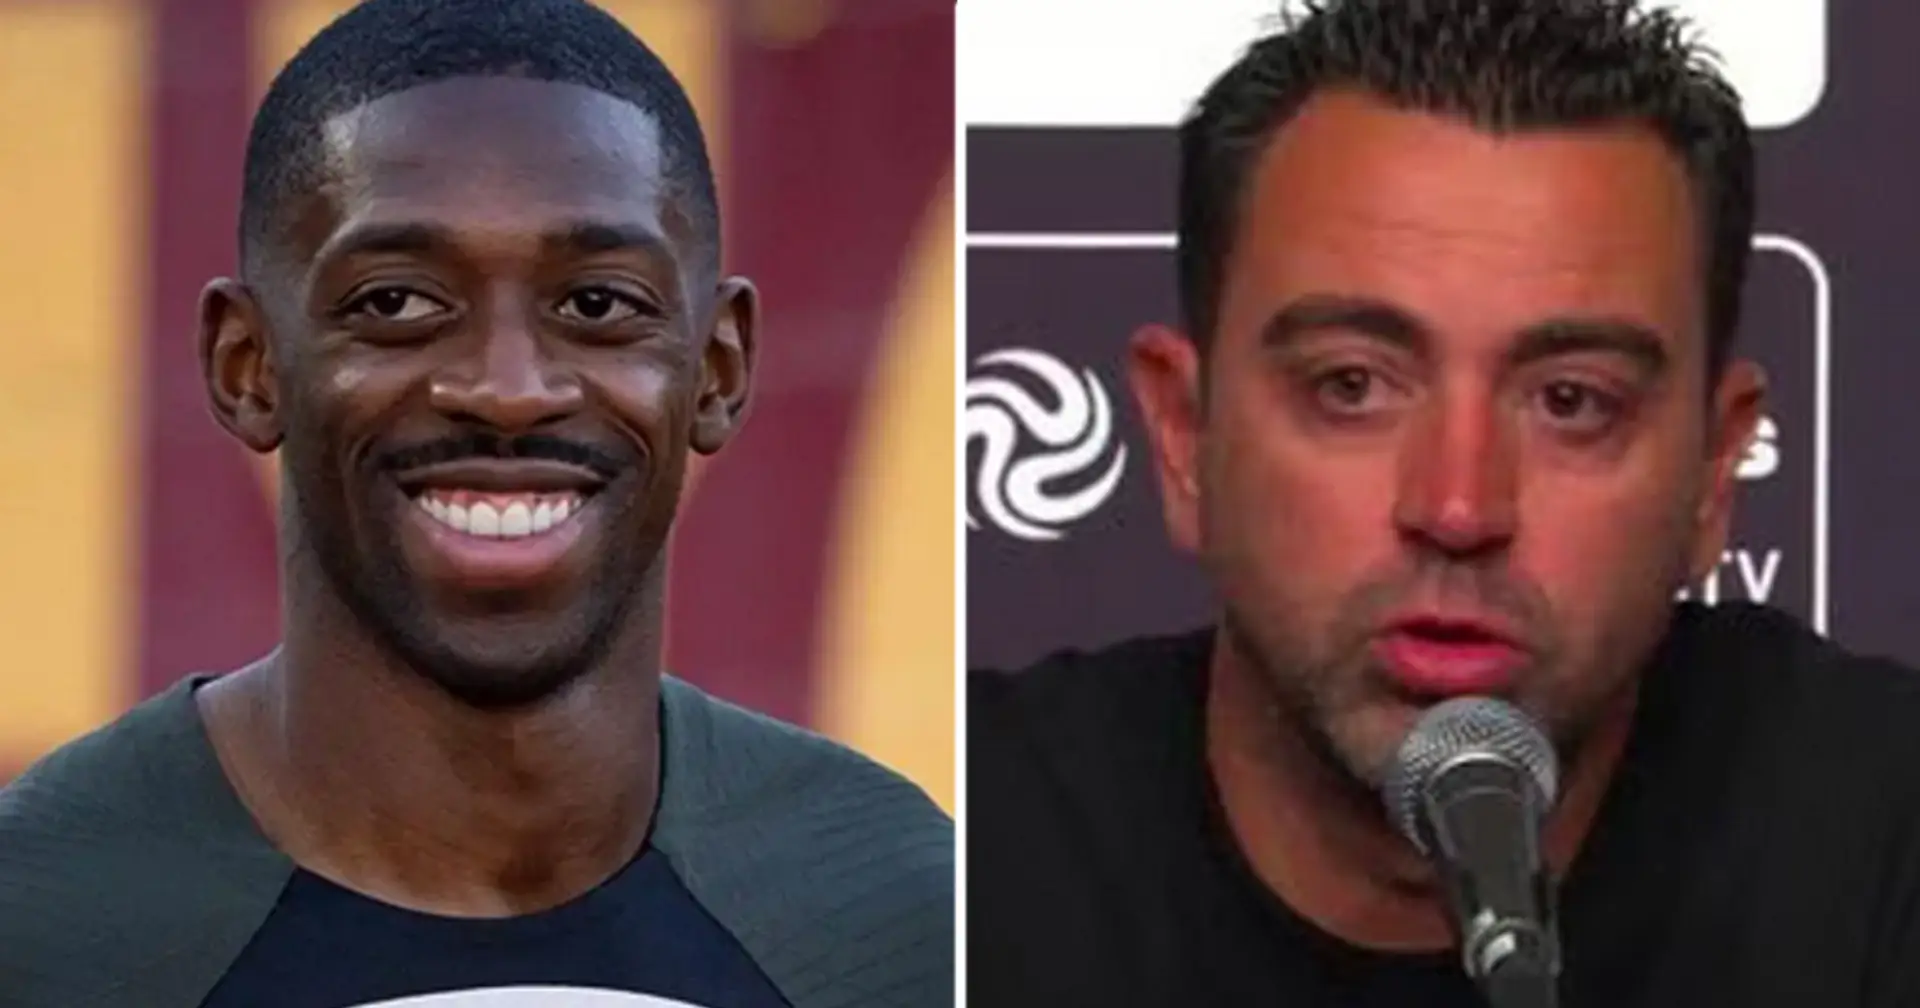 'I'm a little disappointed with him': Xavi explains Dembele's decision to join PSG